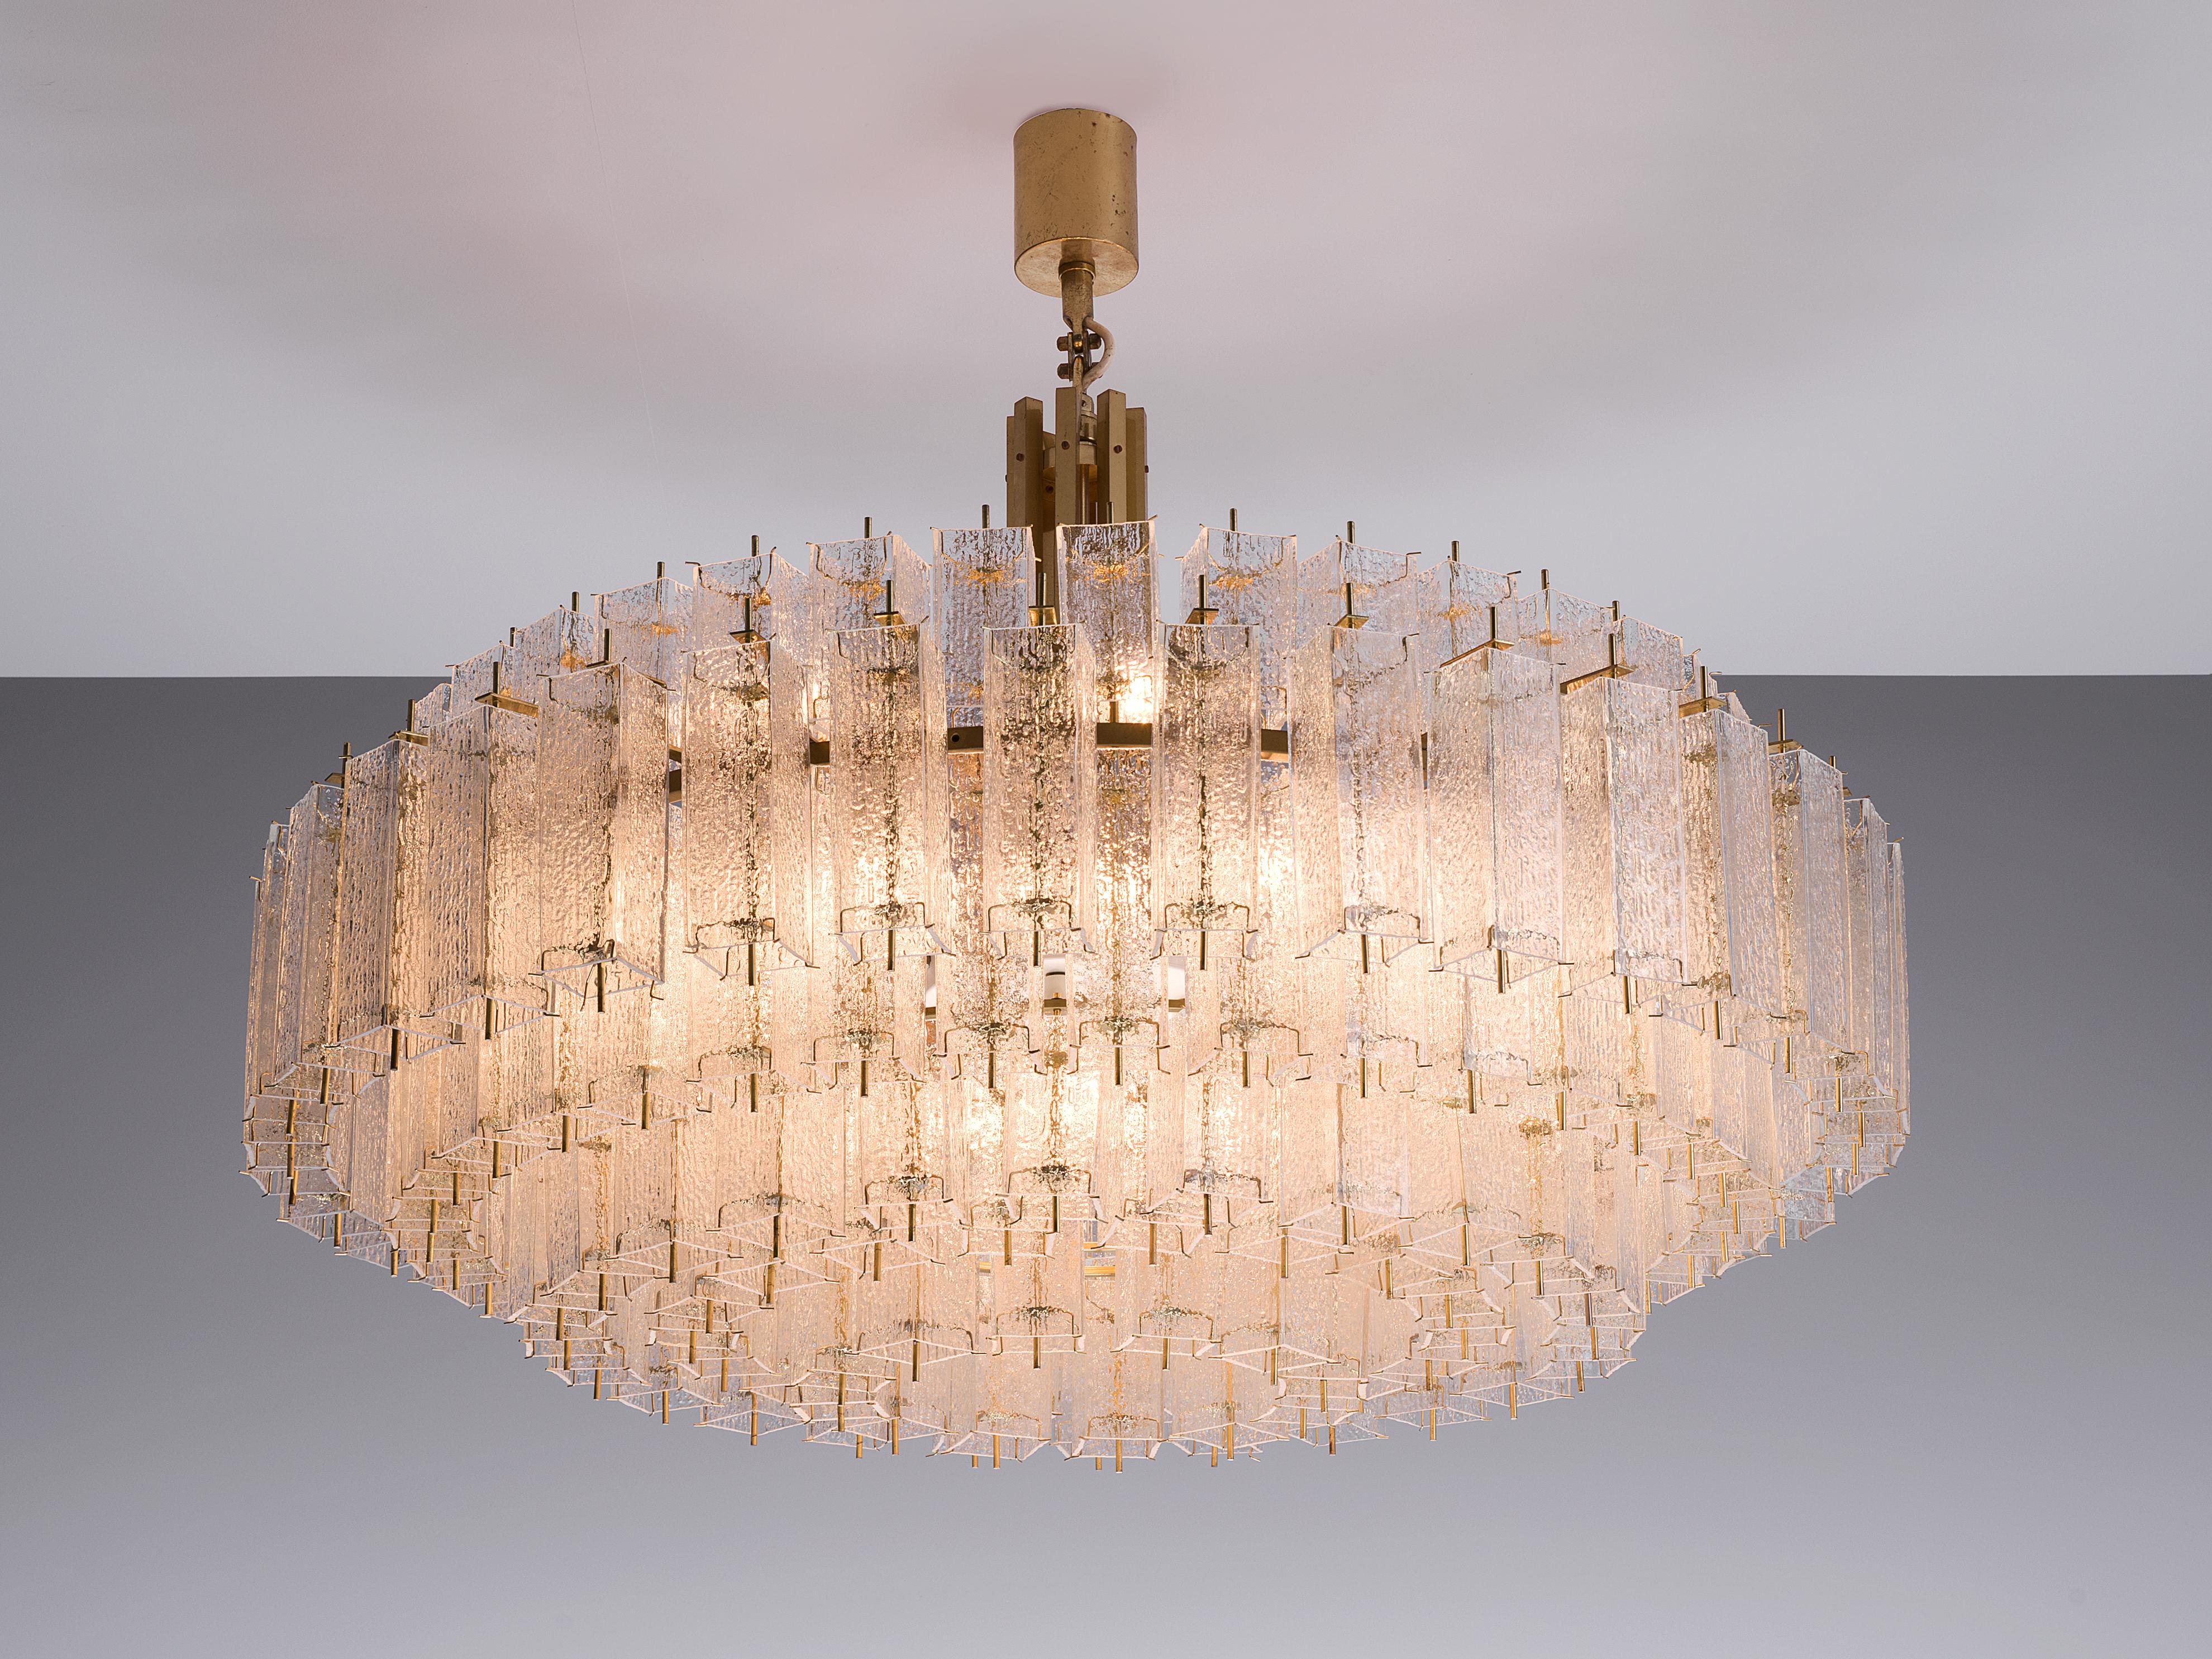 Chandelier, glass and brass, Europe, 1970s.

Grand and luxurious circular 160cm/5ft chandelier with three layers of glass shades. The frame is made of brass and holds numerous structured glass 'tubes' with a brass center. Due to the combination of